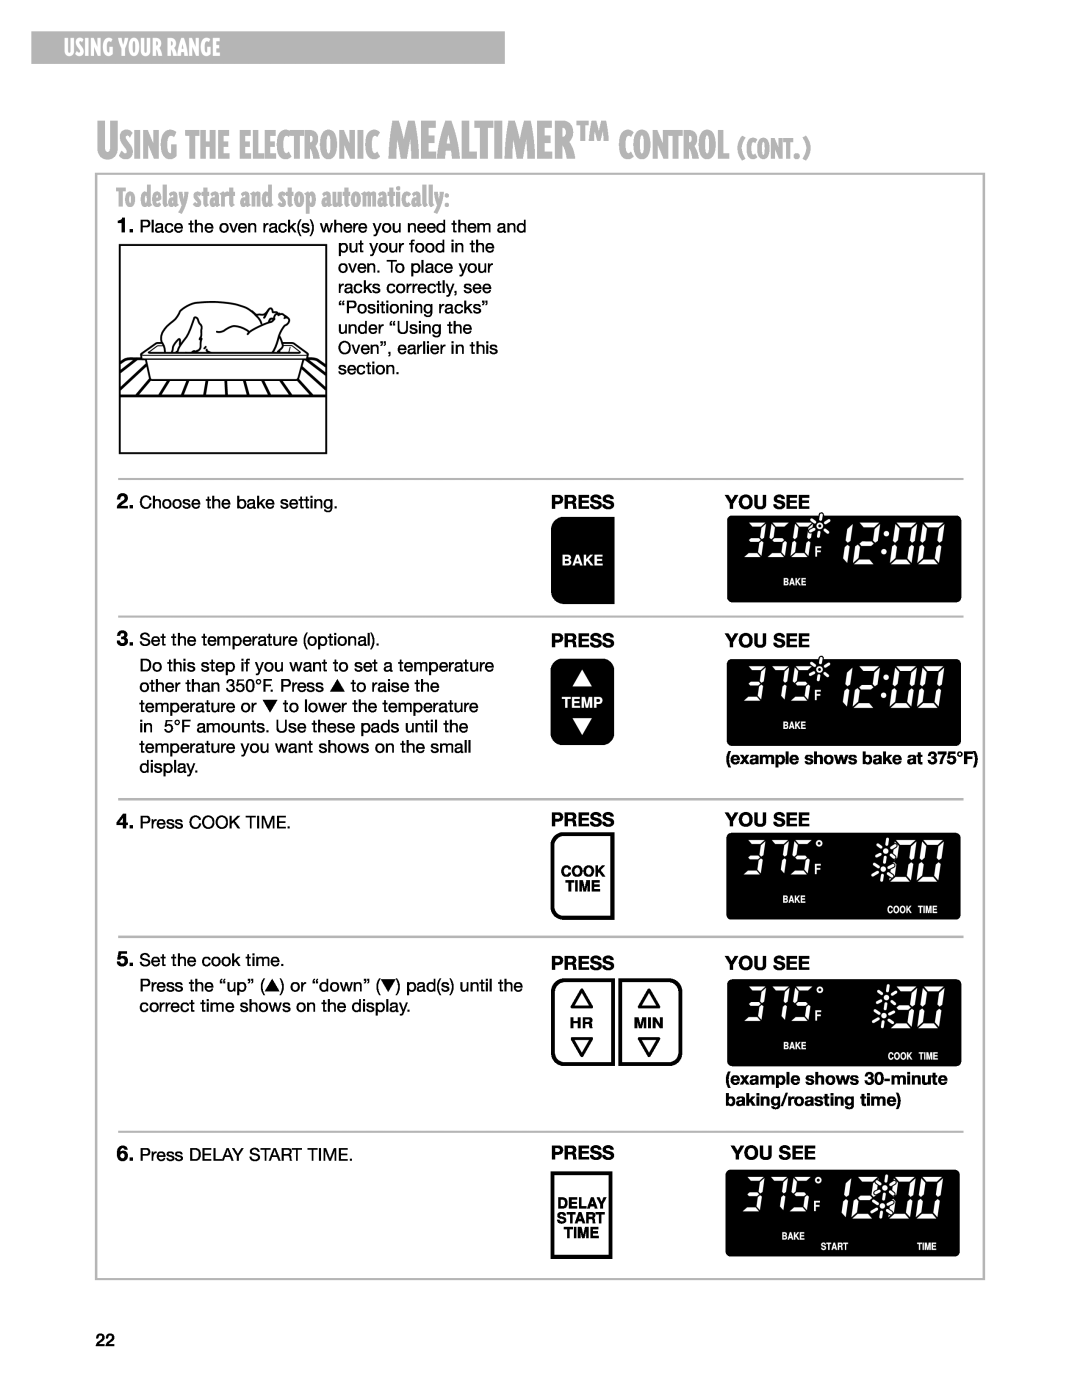 Whirlpool SF195LEH To delay start and stop automatically, Using The Electronic Mealtimerª Control Cont, Using Your Range 